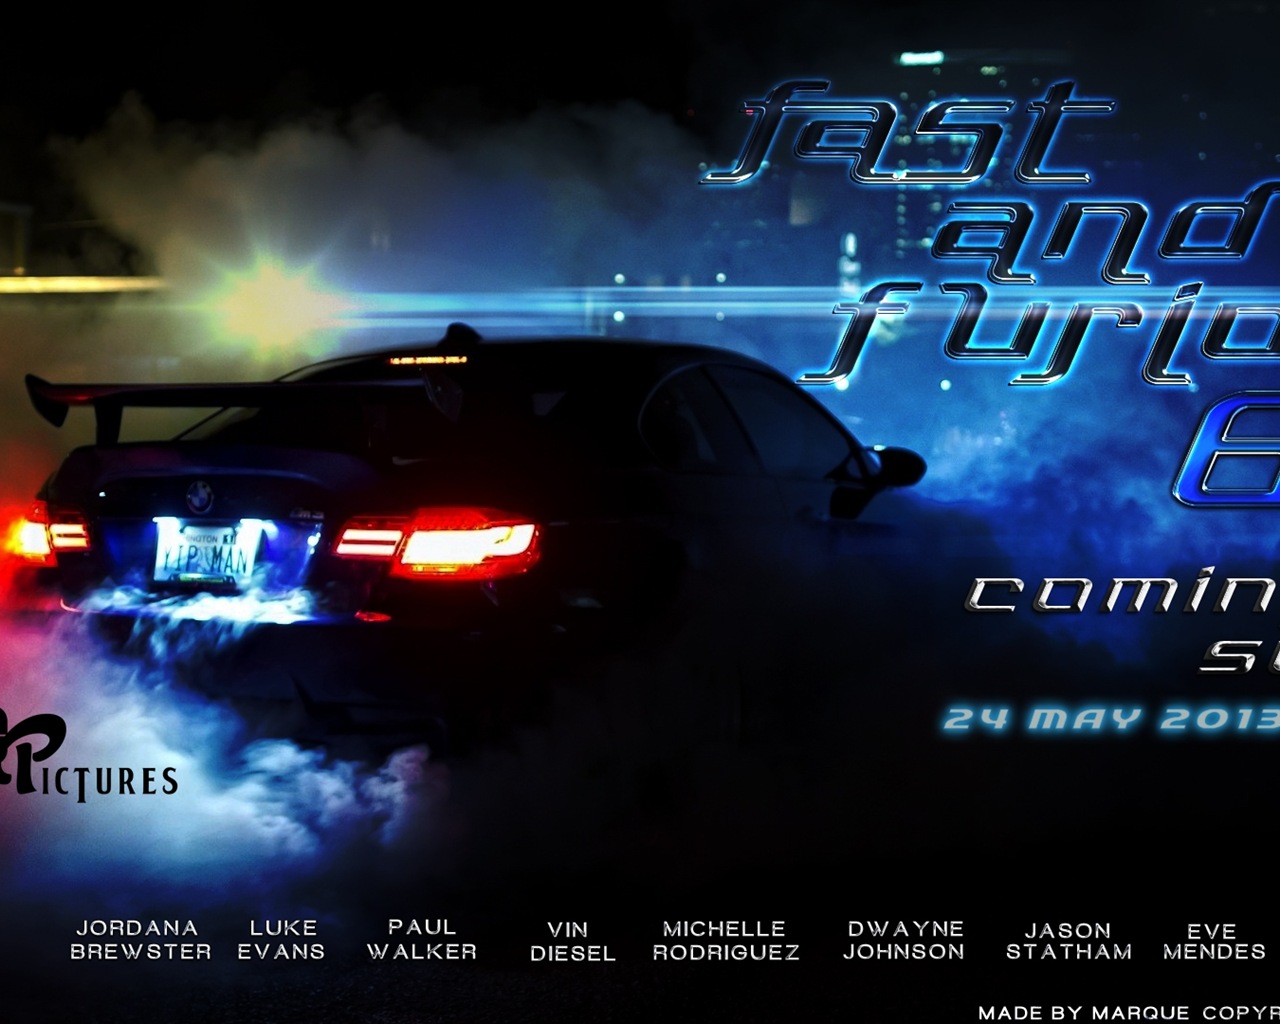 Fast And Furious 6 HD movie wallpapers #3 - 1280x1024